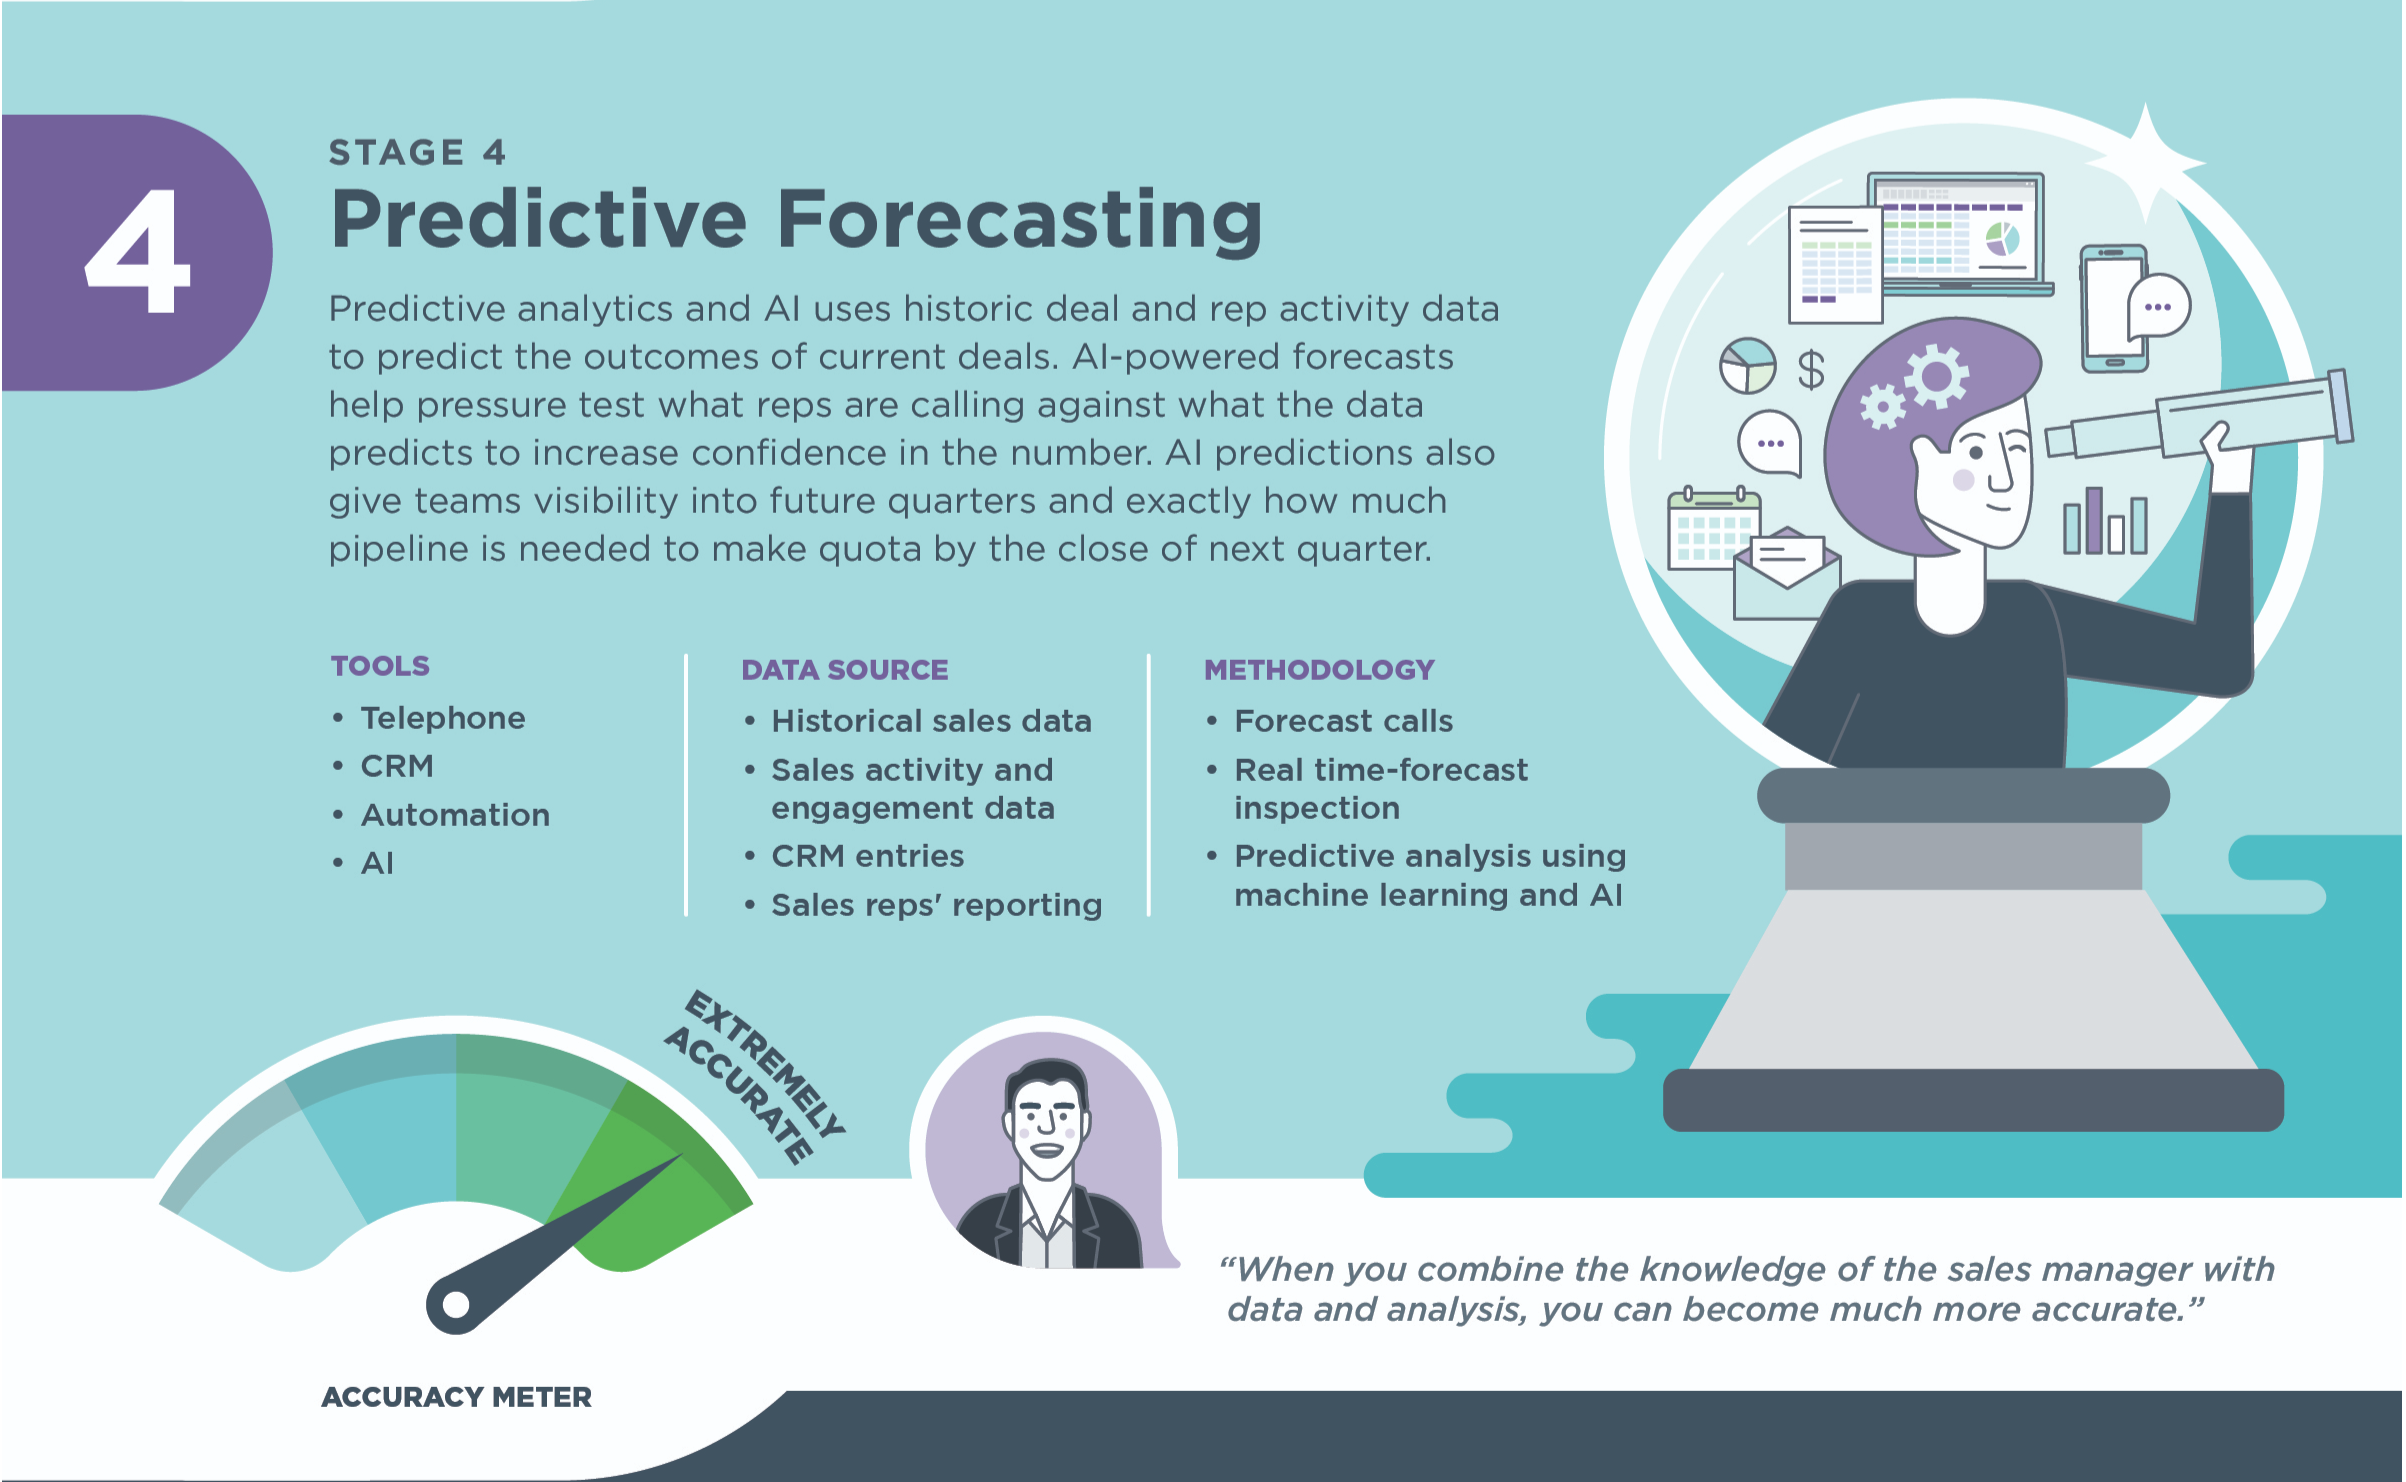 Illustration of stage 4: predictive forecasting showing an accuracy meter with the needle pointing toward extremely accurate